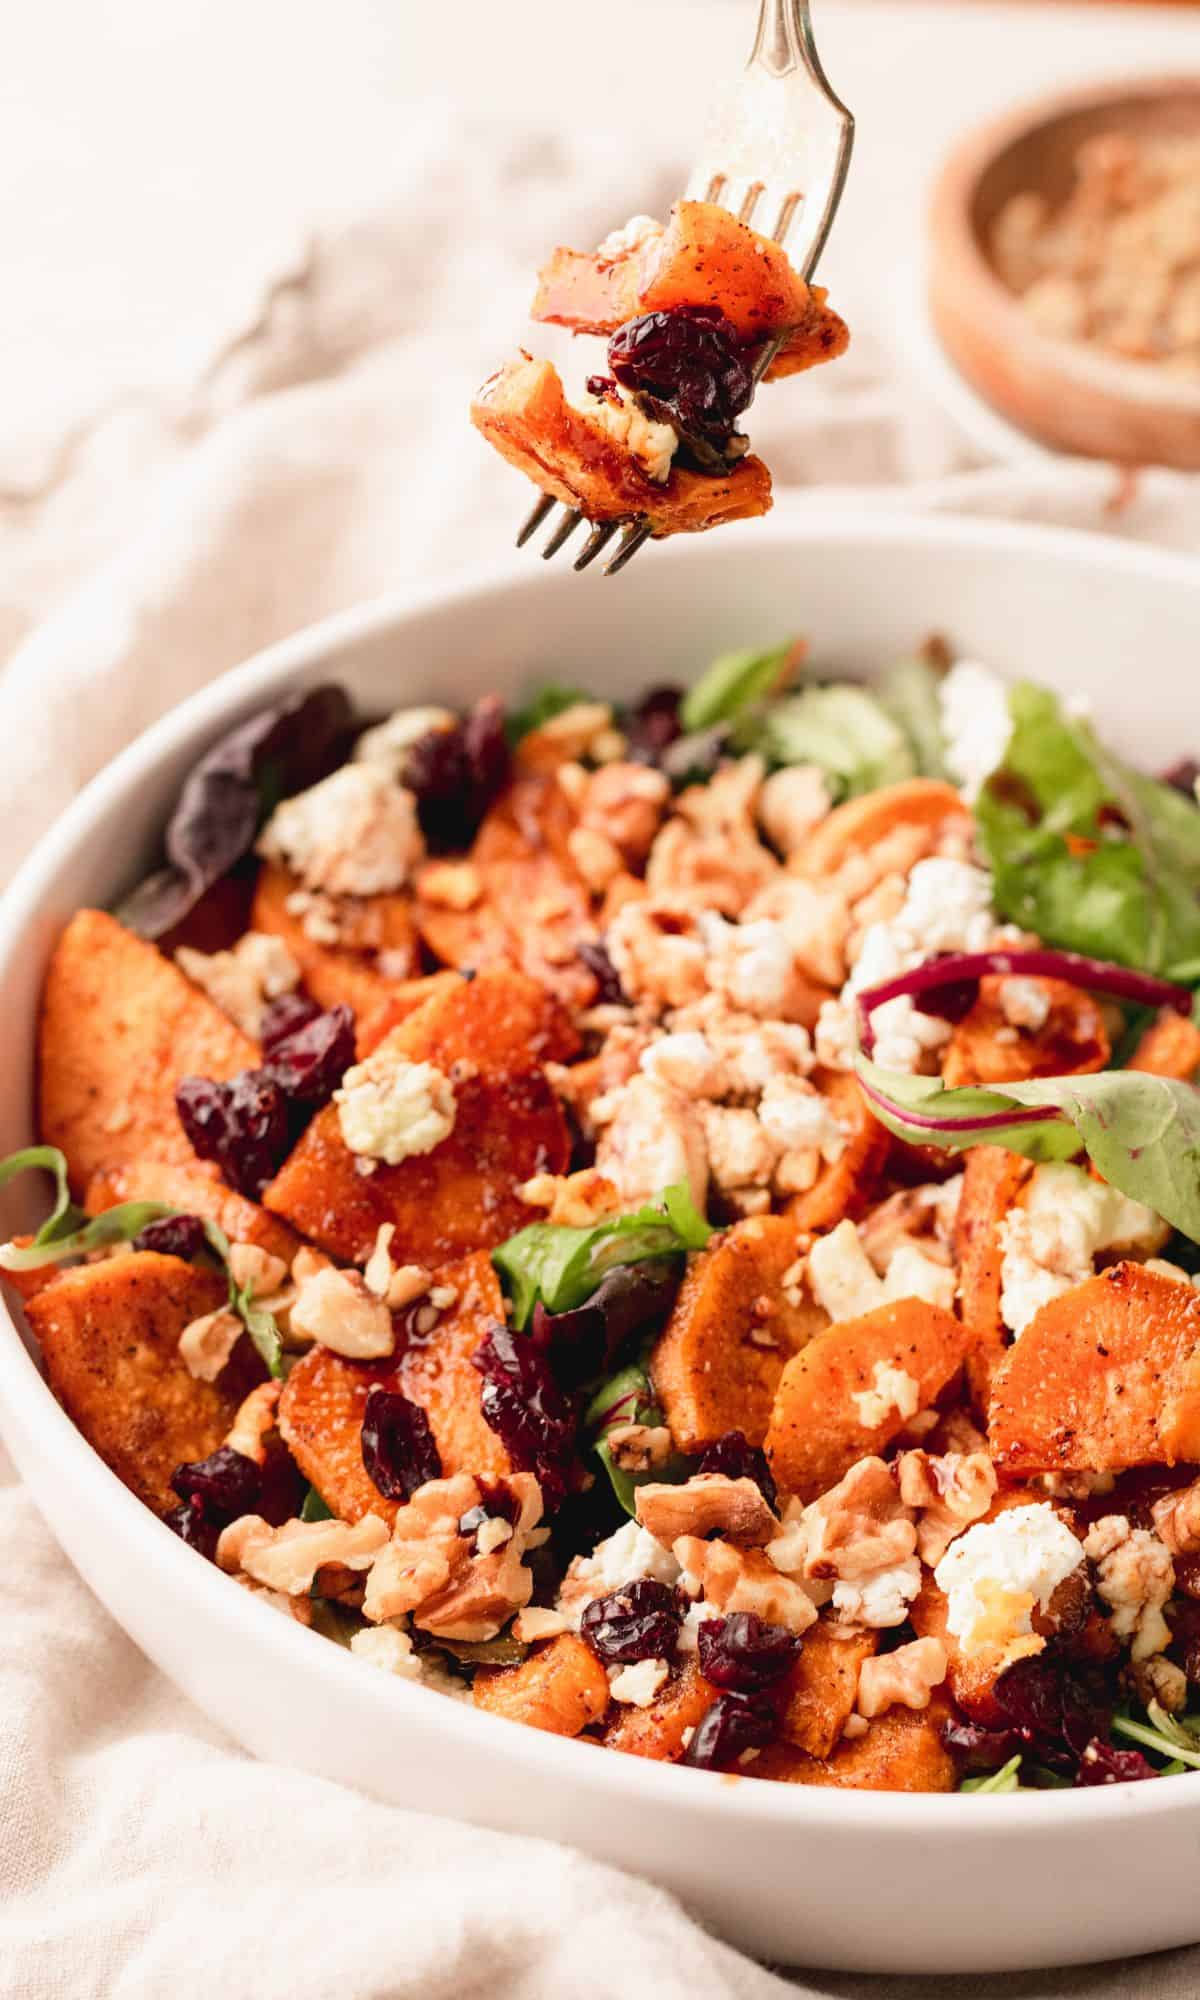 Roasted sweet potato salad in a white bowl.